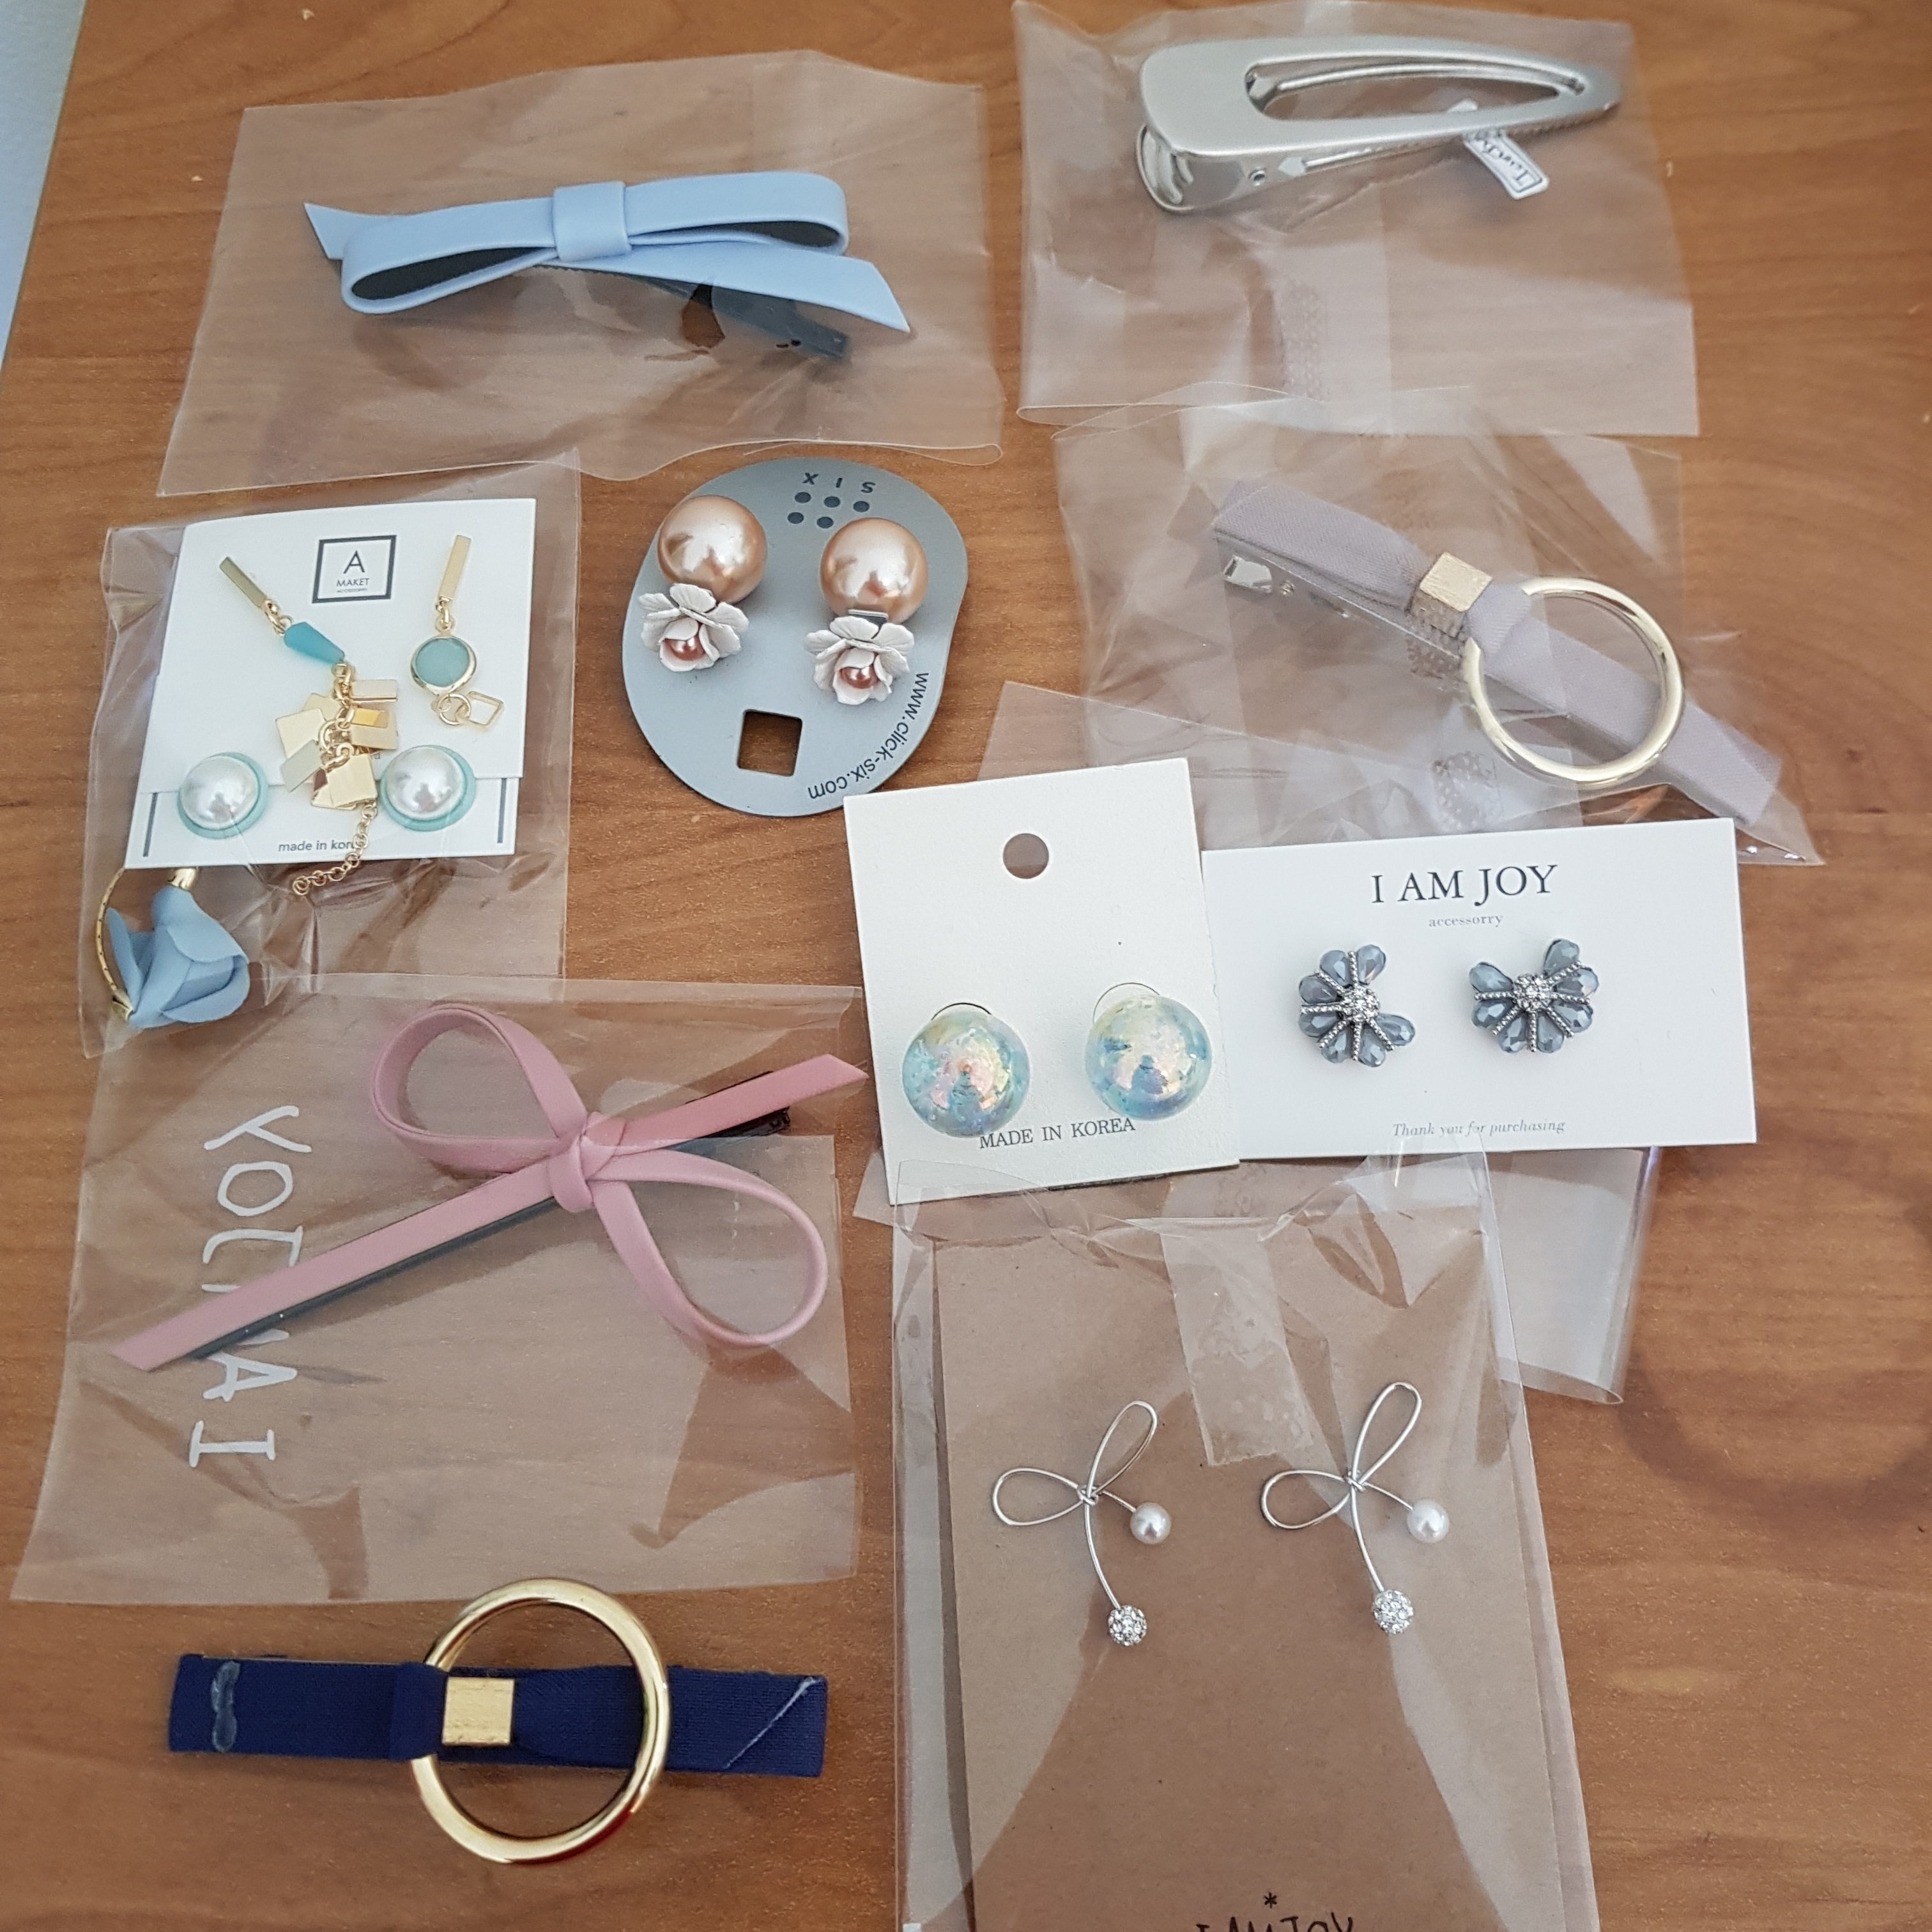 Unique hair-clips and earrings from Seoul